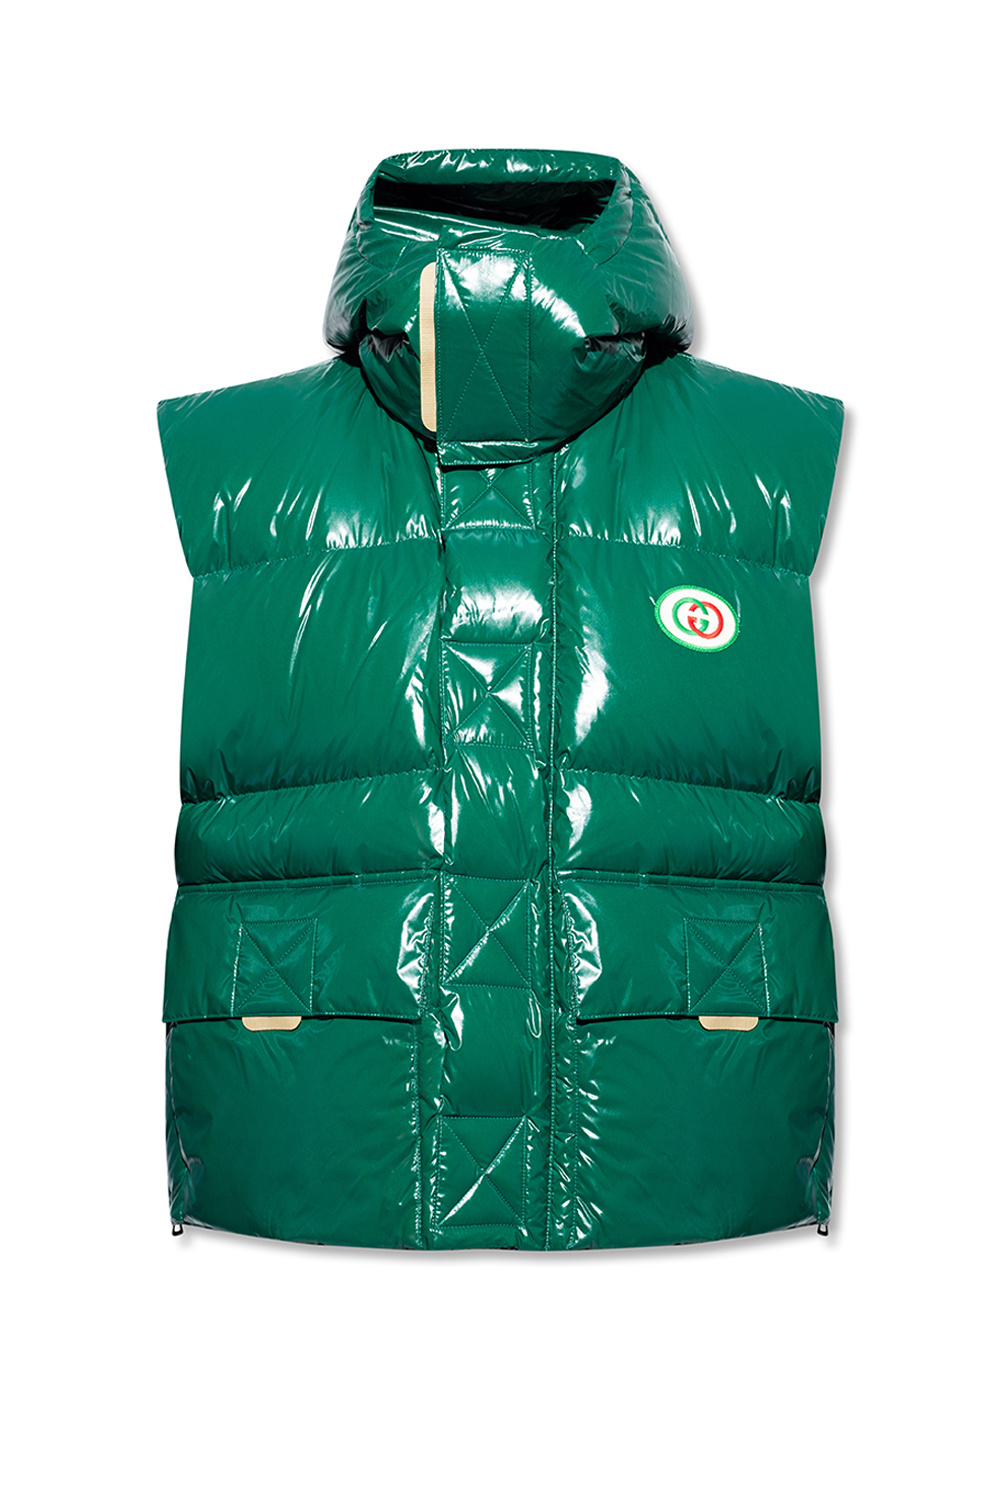 Down vest Gucci - sweatshirt with a print and logo gucci kids